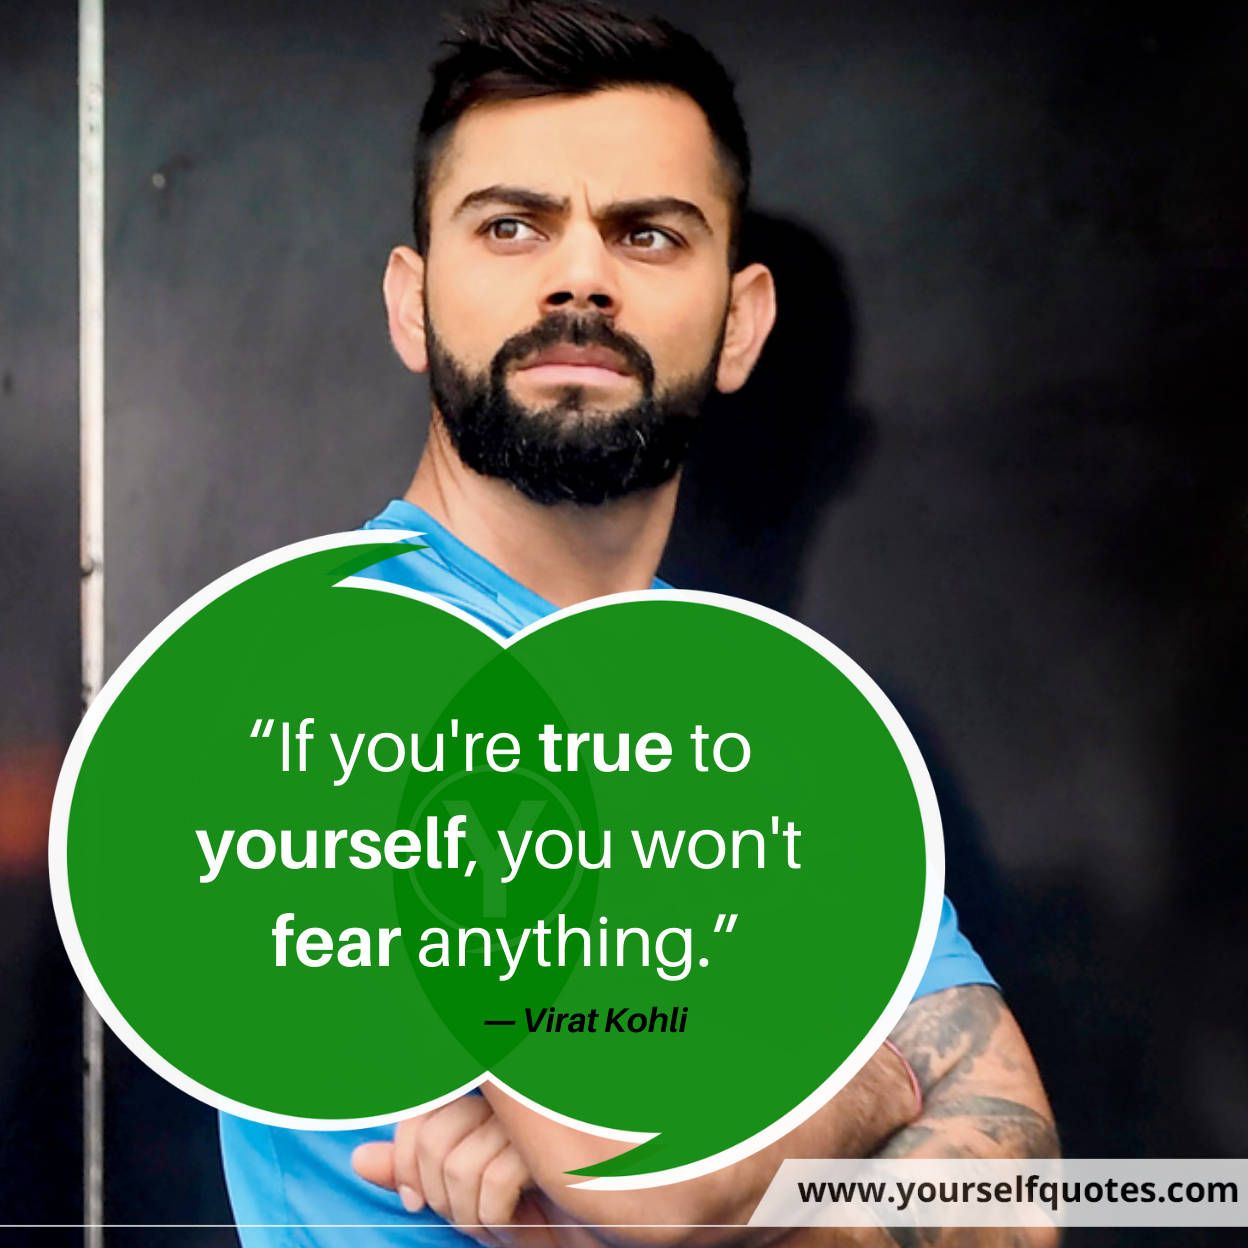 Virat Kohli Quotes That Will Inspire You Forever. ― YourSelfQuotes